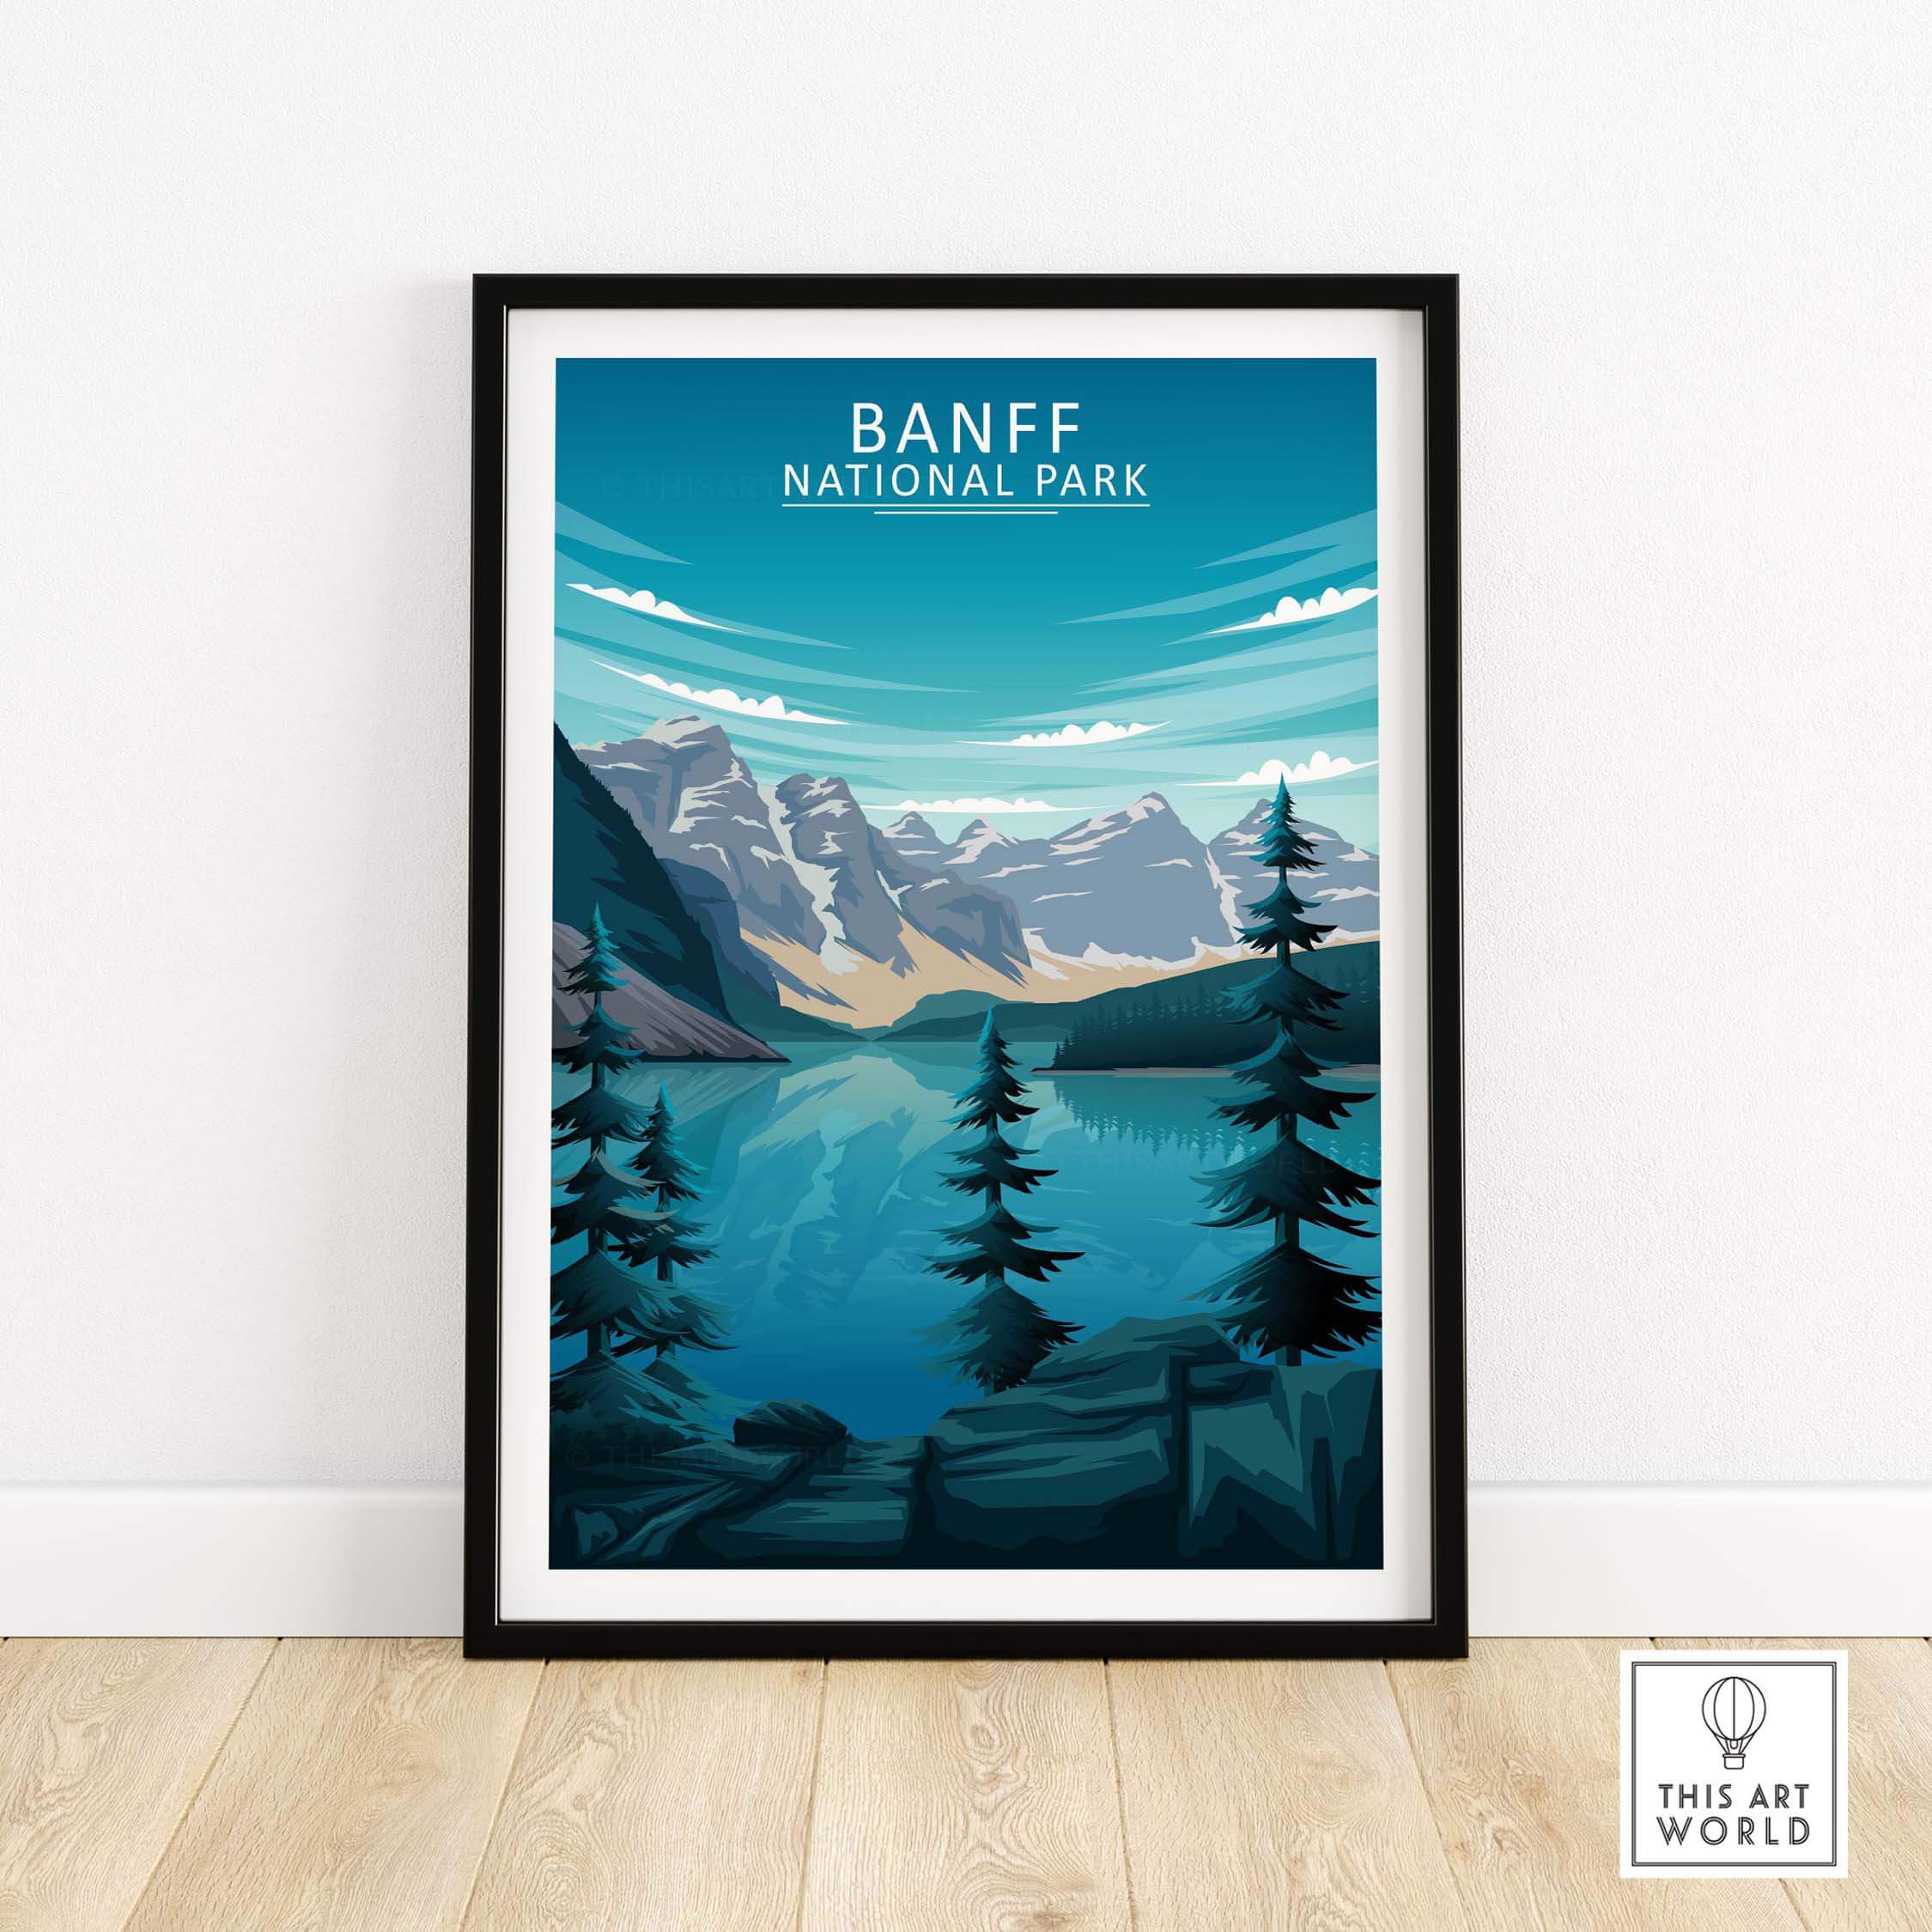 Vintage Style Travel Posters | ThisArtWorld | Poster